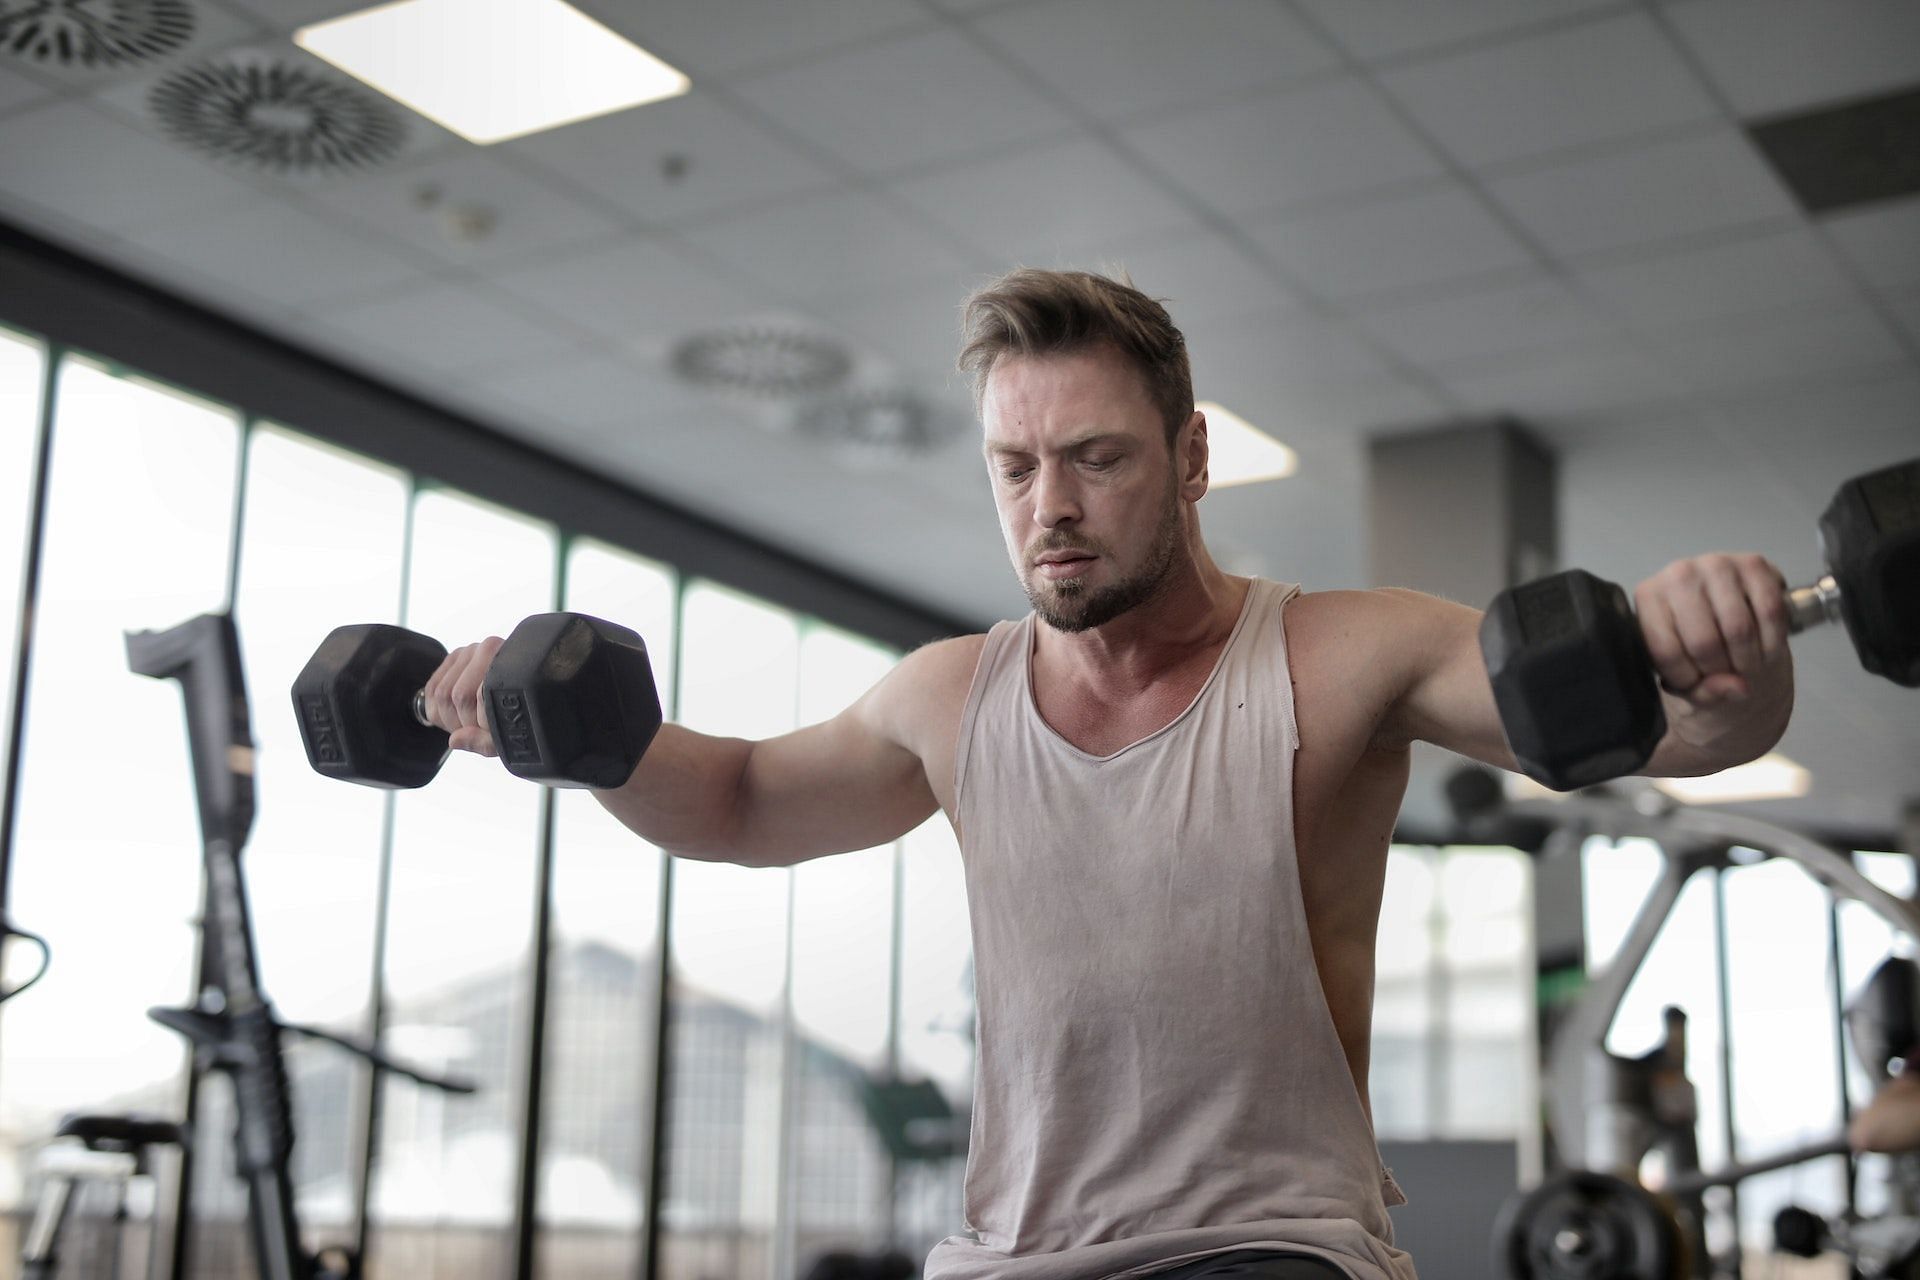 The lateral raise is an isolation exercise to strengthen the shoulders. (Photo via Pexels/Andrea Piacquadio)